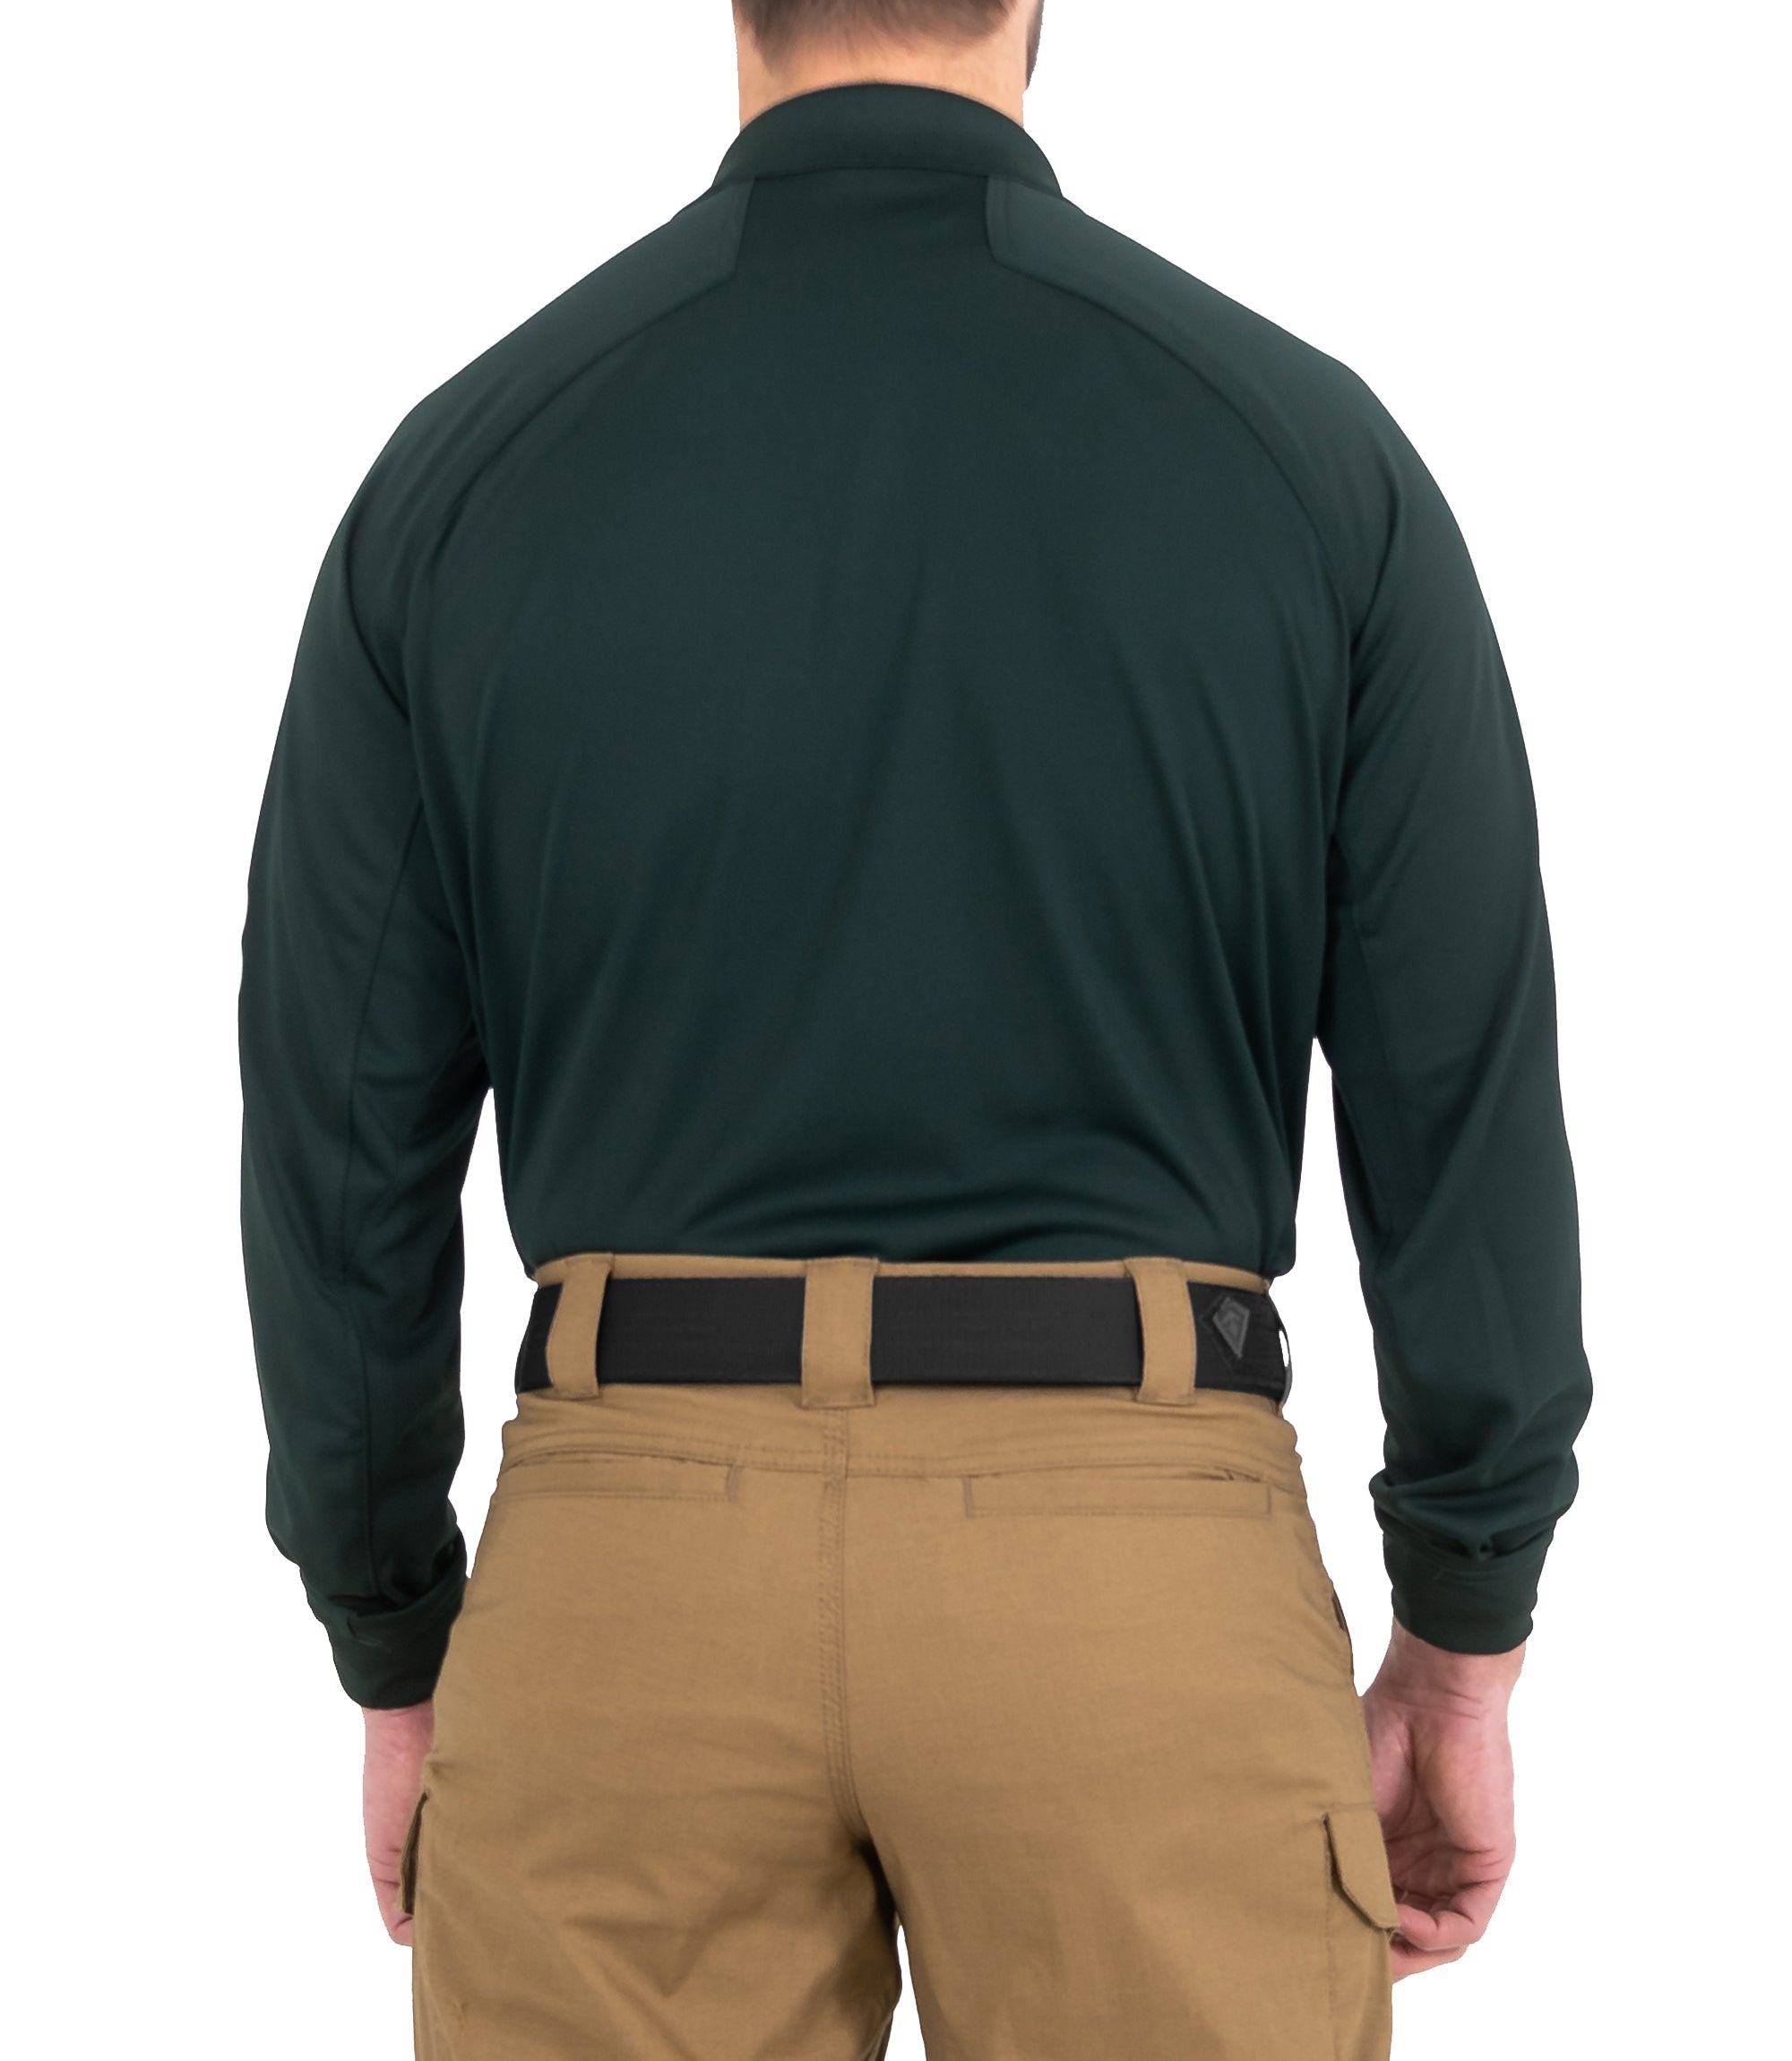 First Tactical Men's Performance Long Sleeve Polo / Spruce Green